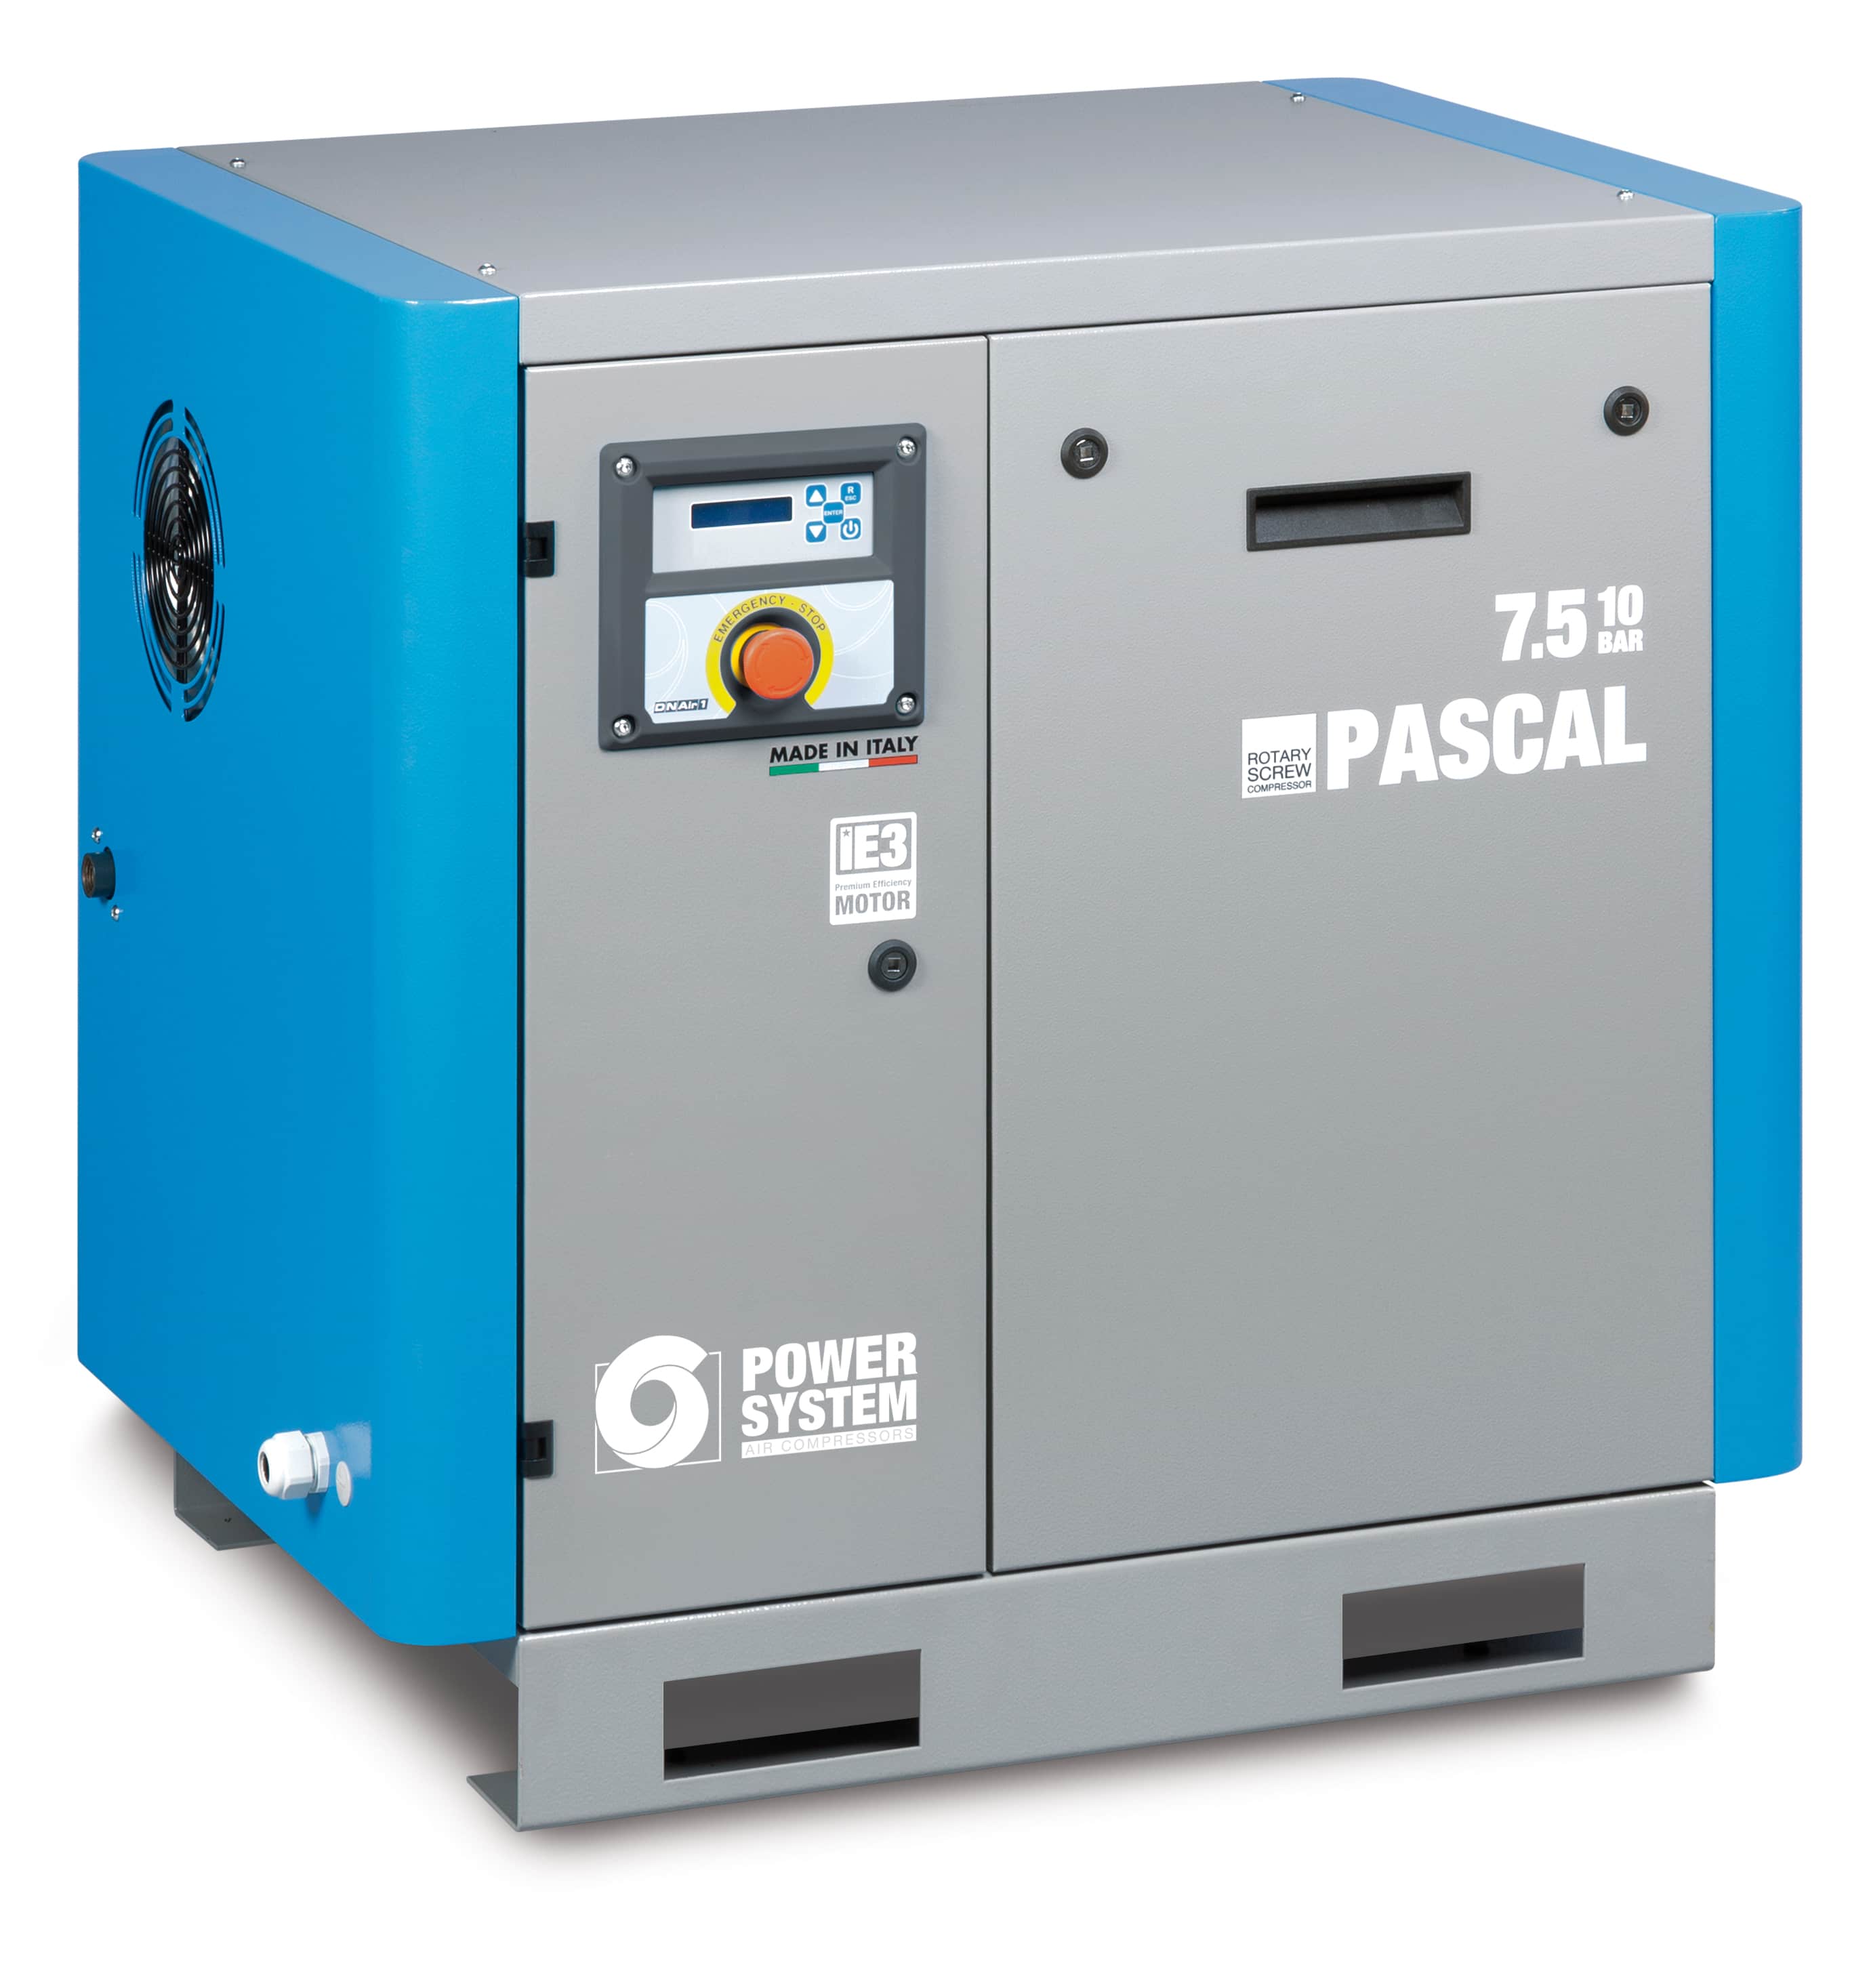 POWER SYSTEM - Pascal